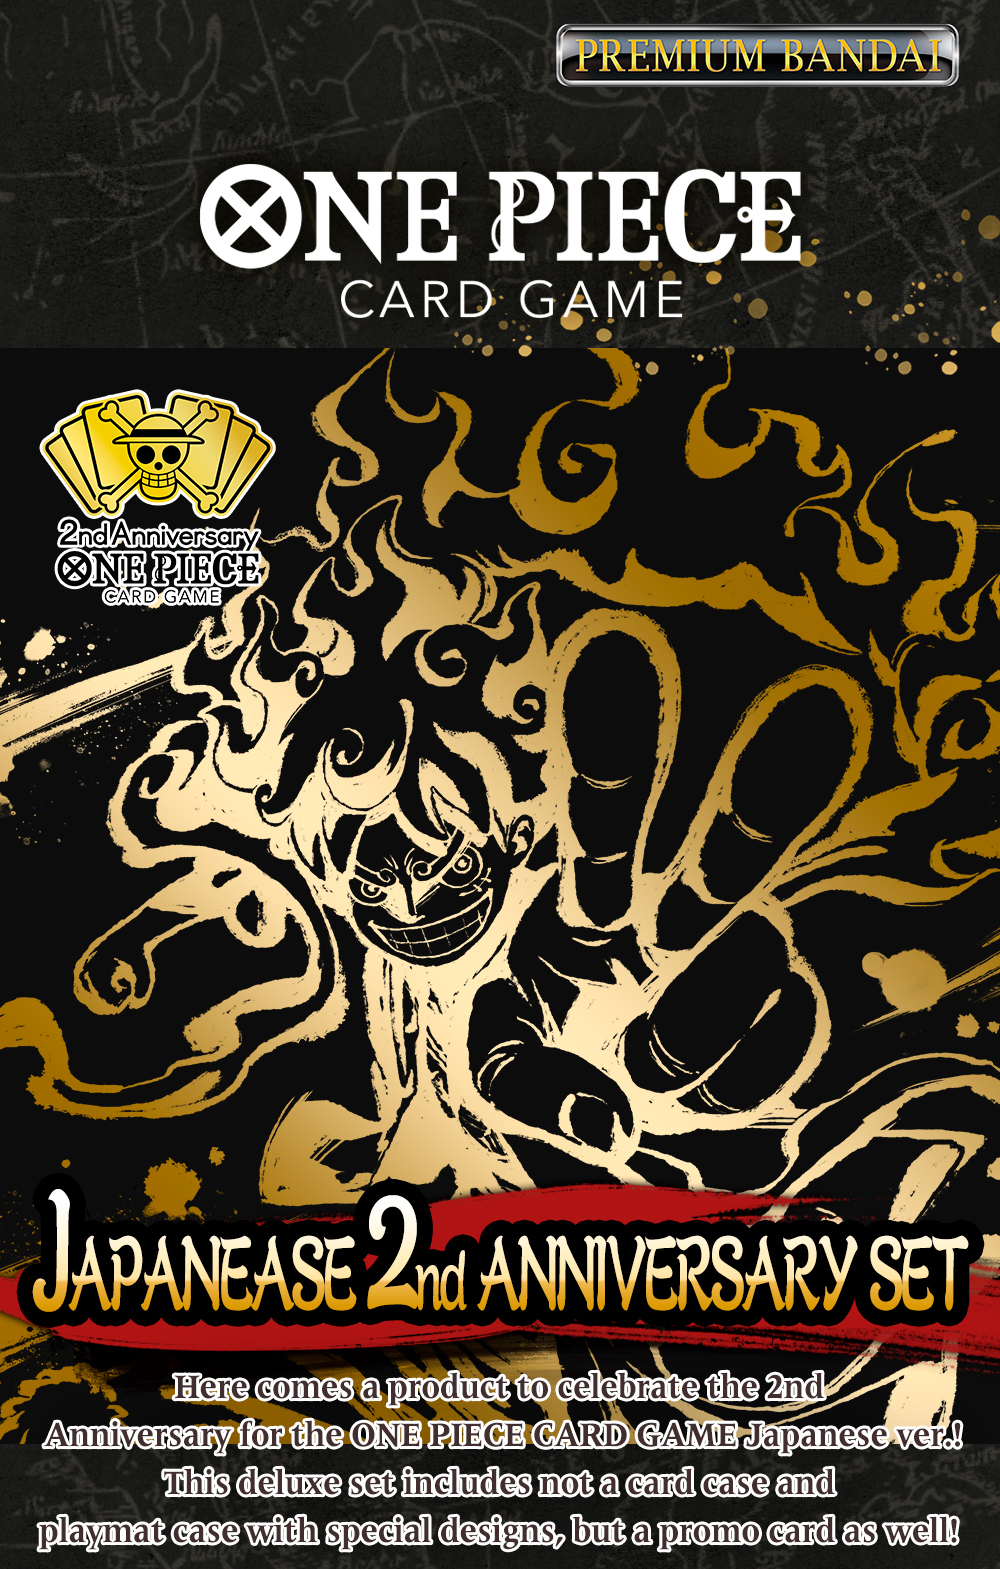 ONE PIECE CARD GAME Japanese 2nd Anniversary Set